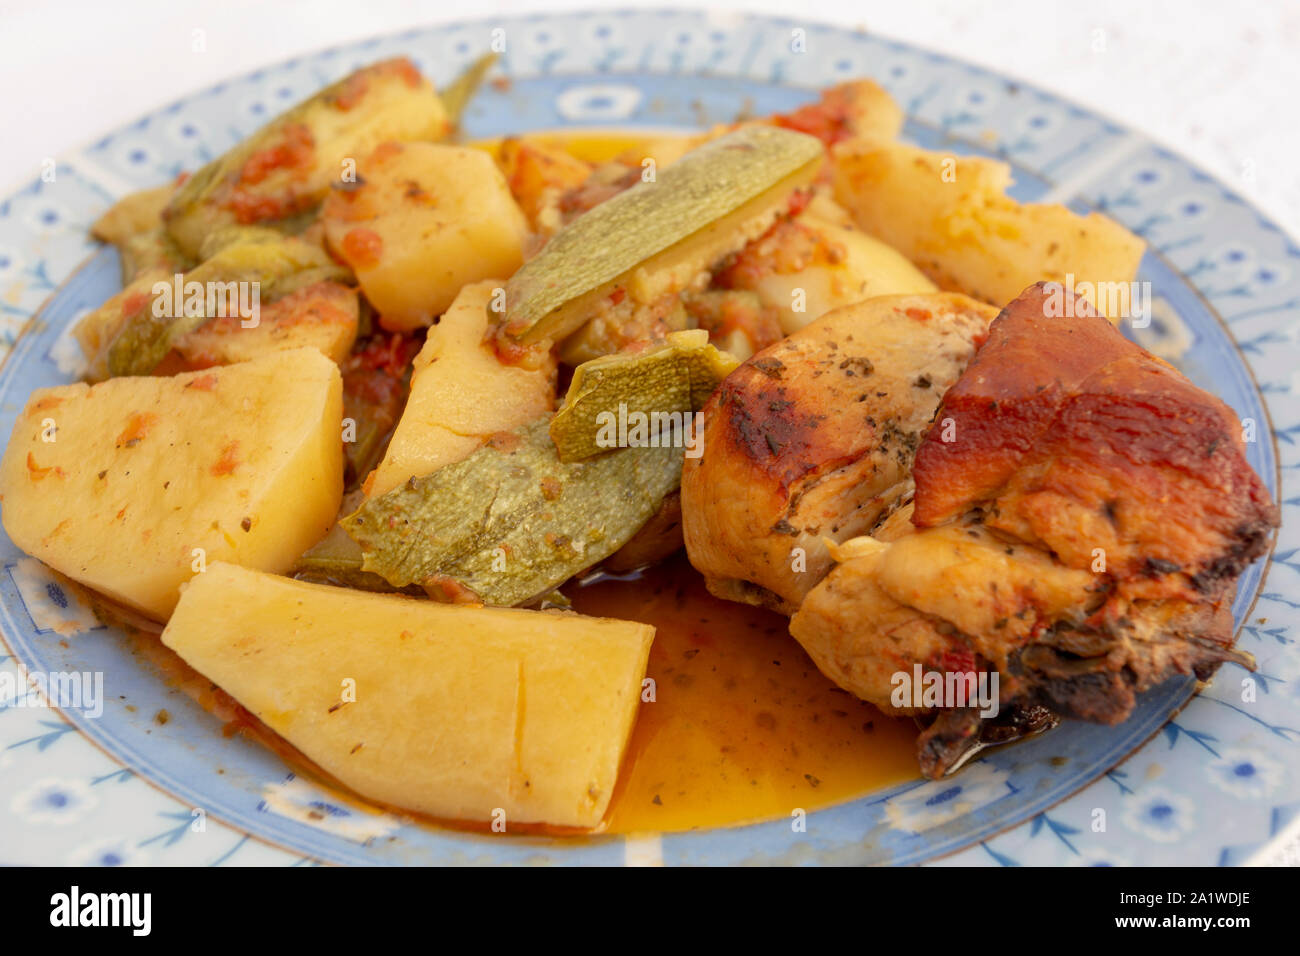 An authentic plate of Cretan oven-baked chicken with potatoes and courgettes (zuccini) in a rich tomato and herb olive-oil sauce Stock Photo